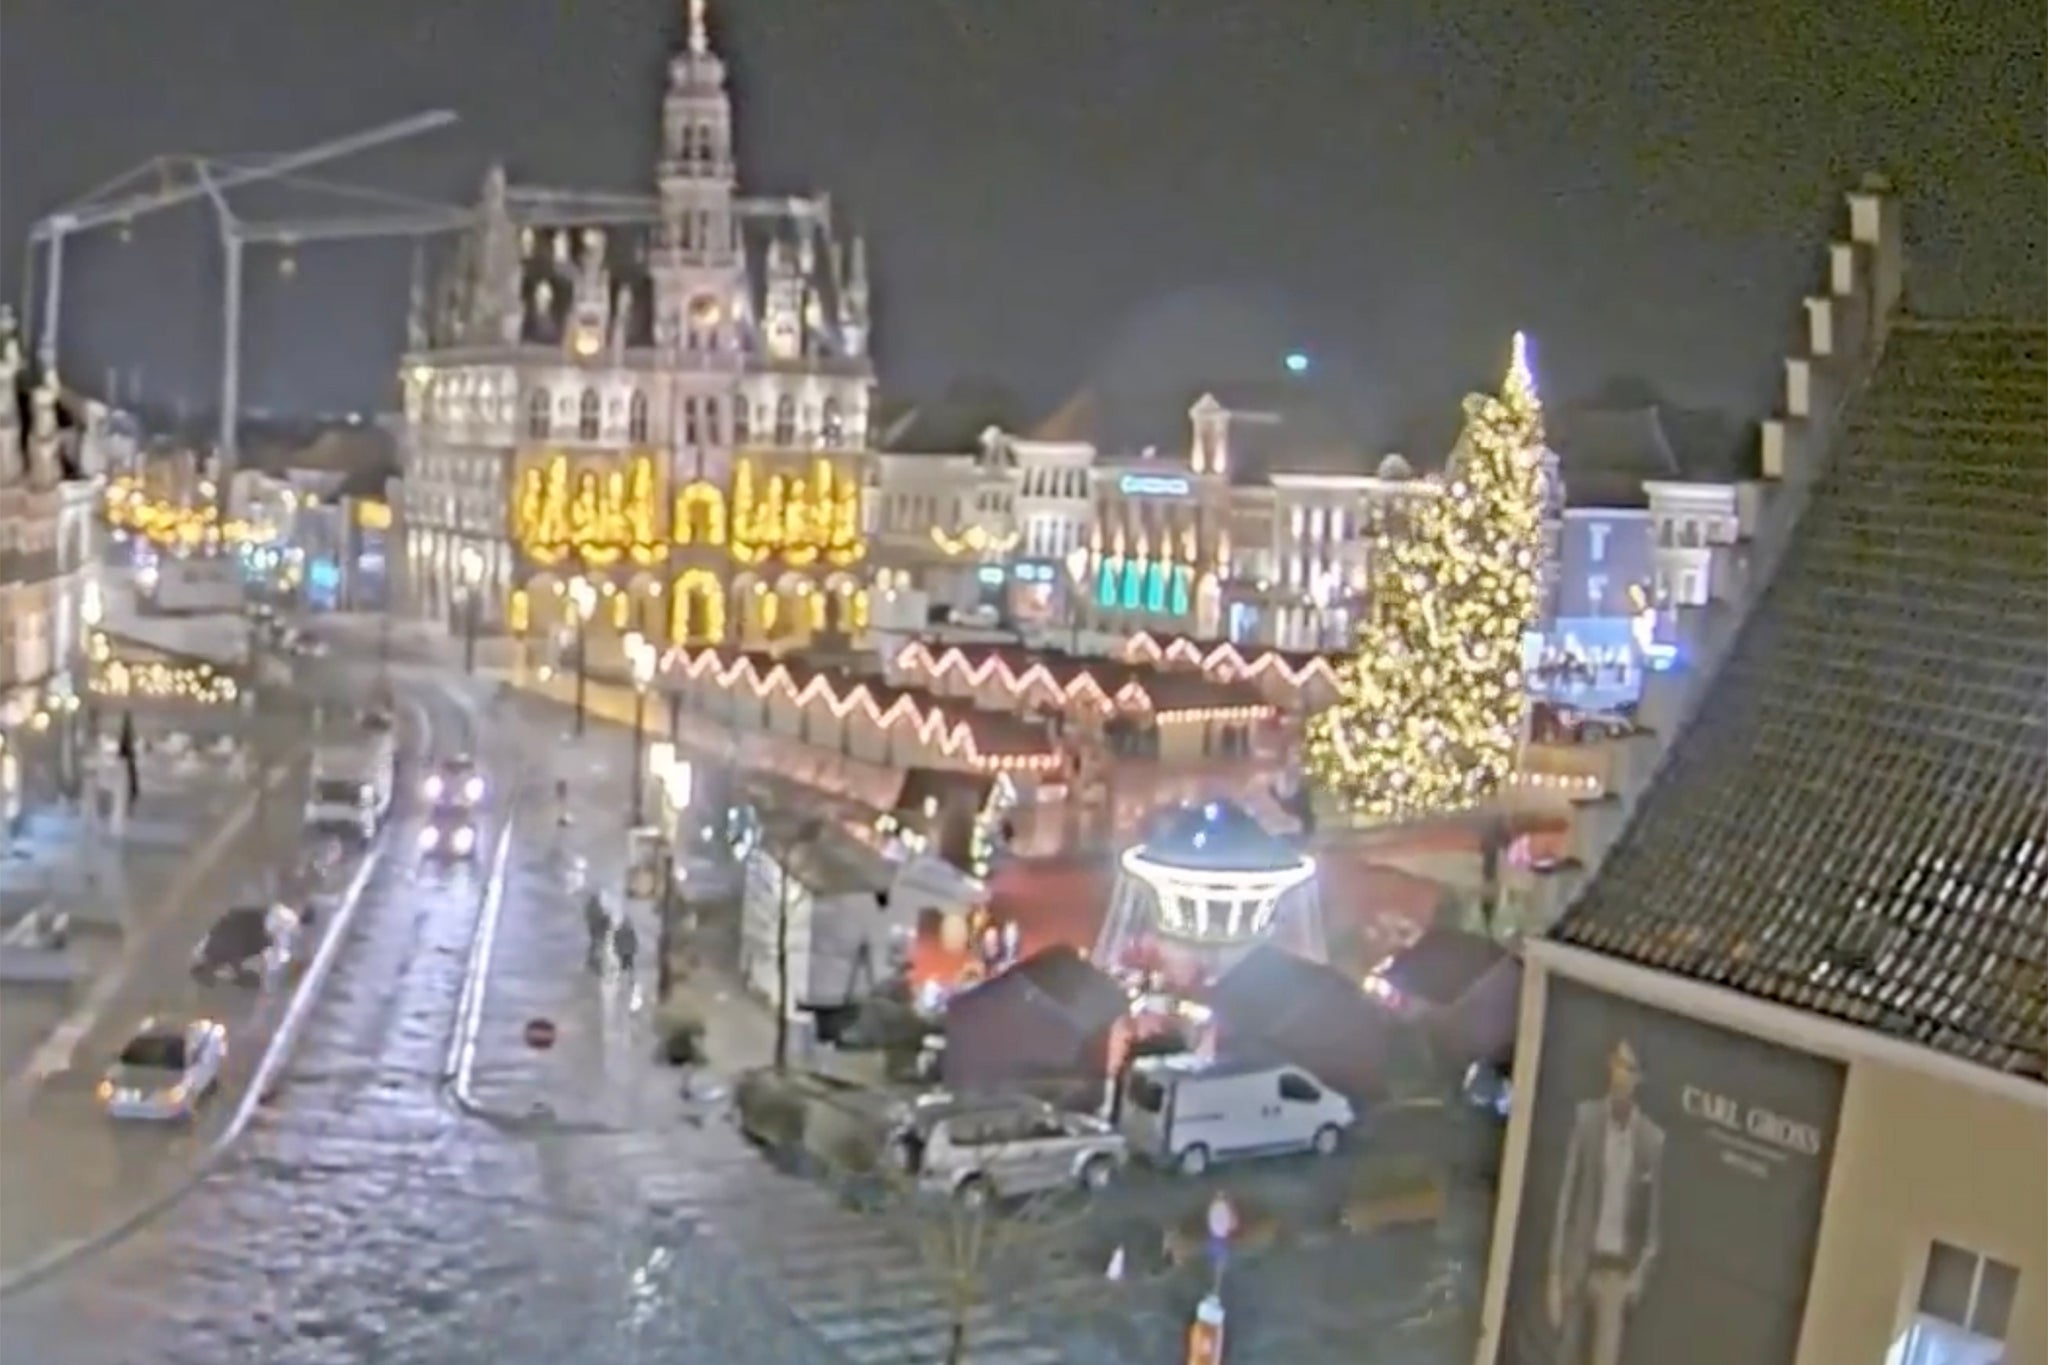 The 65ft Christmas tree collapsed next to a Christmas market in the historic town square